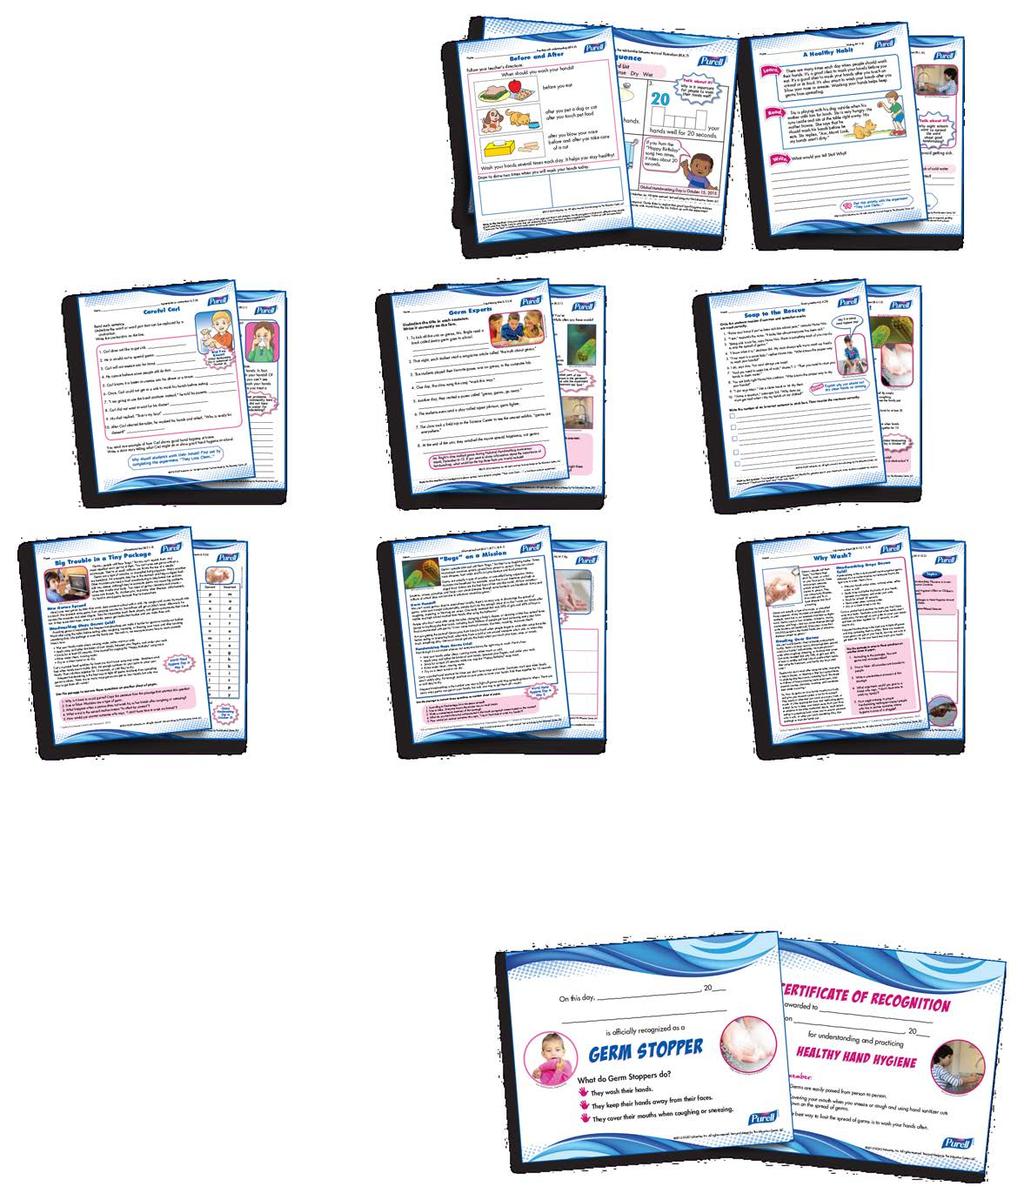 Common Core Activity Pages Continue the focus on handwashing for good health with engaging, ready-to-use worksheets.